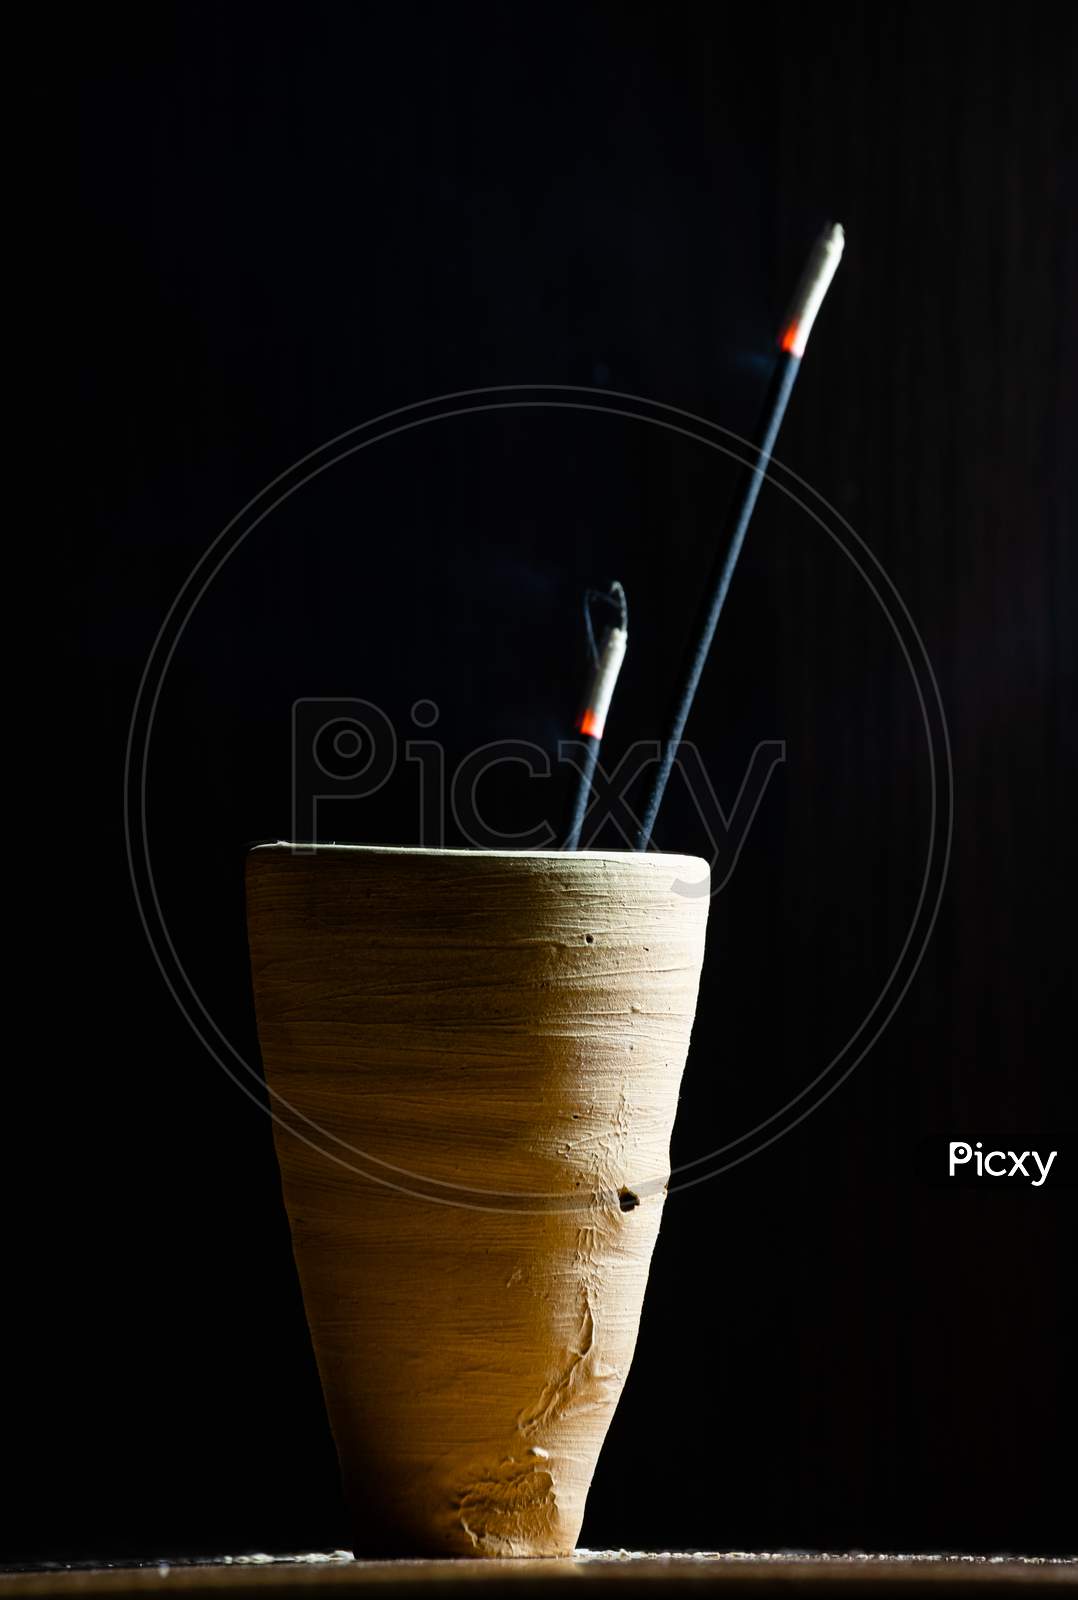 Incense Sticks Burning In A Clay Made Pot With Black Background, Agarbatti, Indian Culture, Religious Occasions,